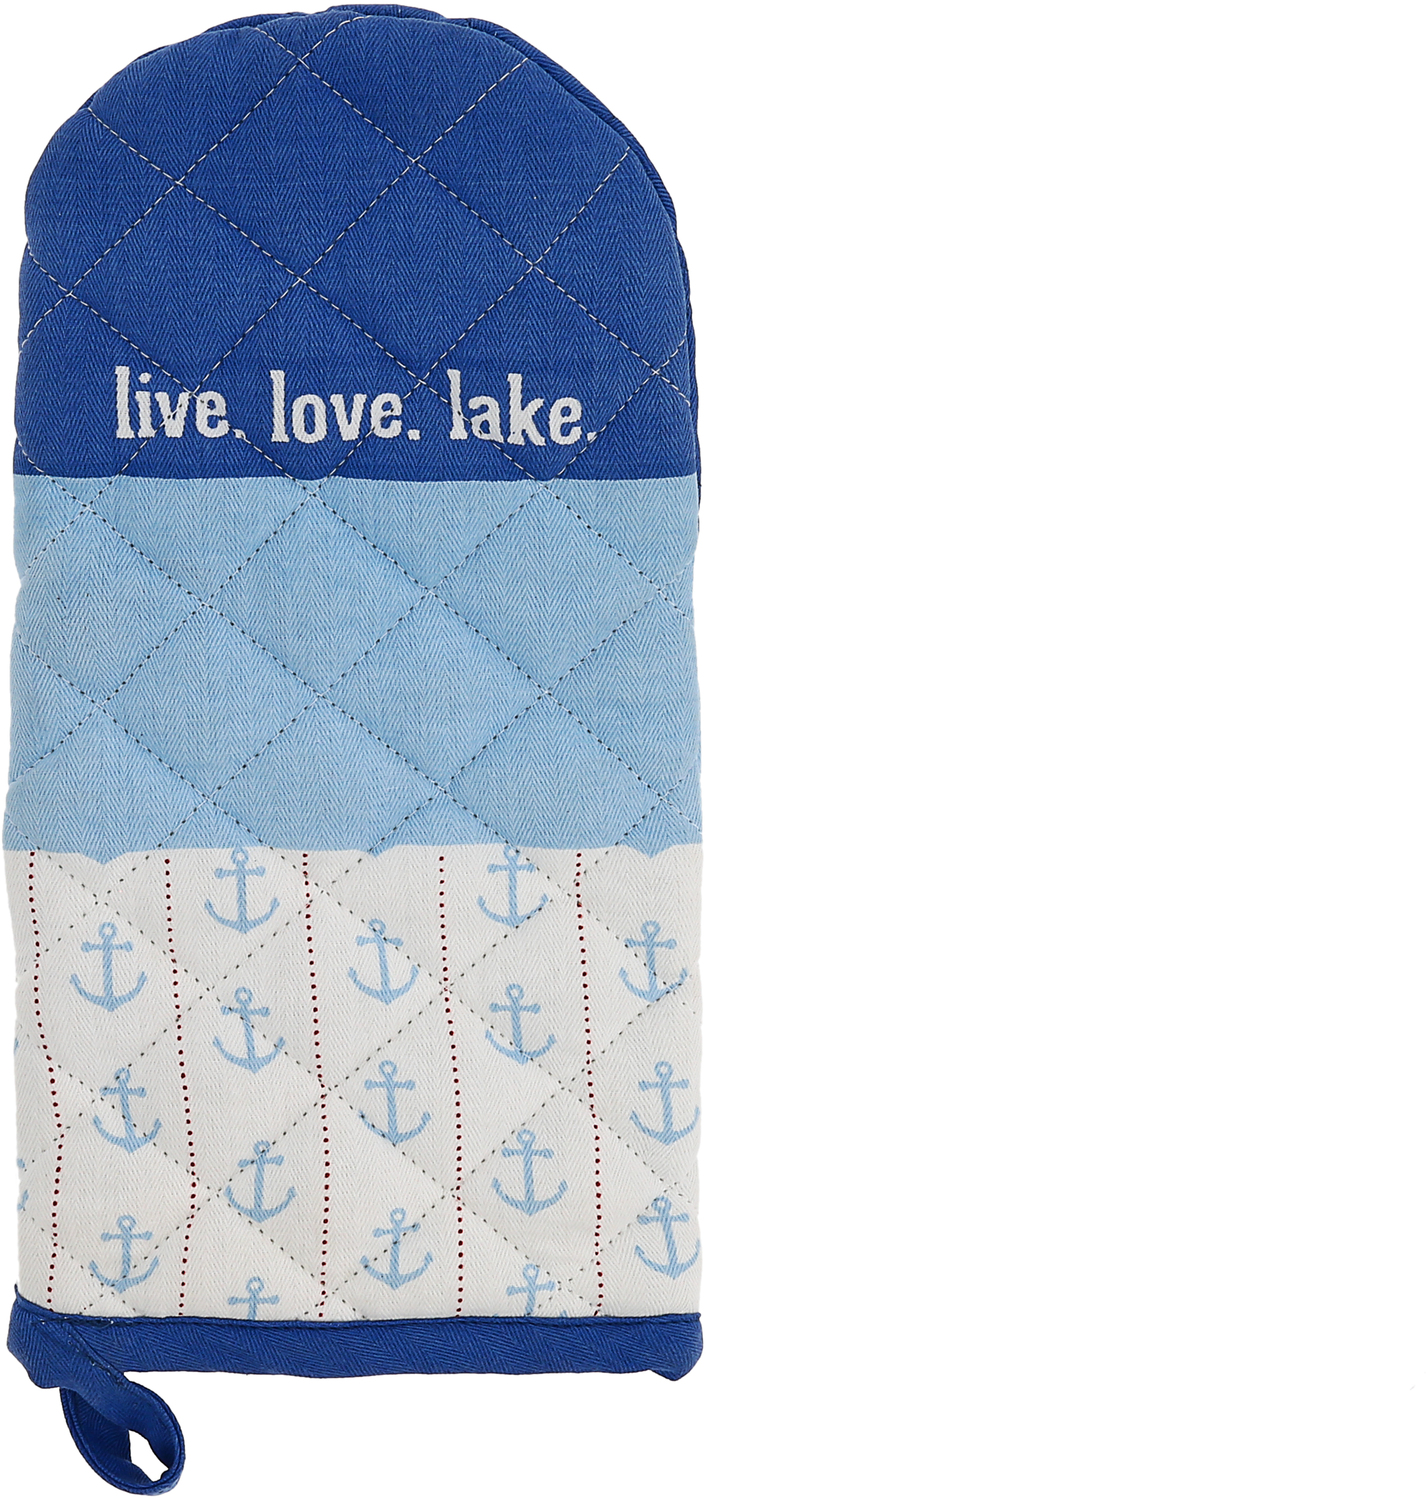 Live. Love. Lake. by We People - Live. Love. Lake. - 12" Oven Mitt